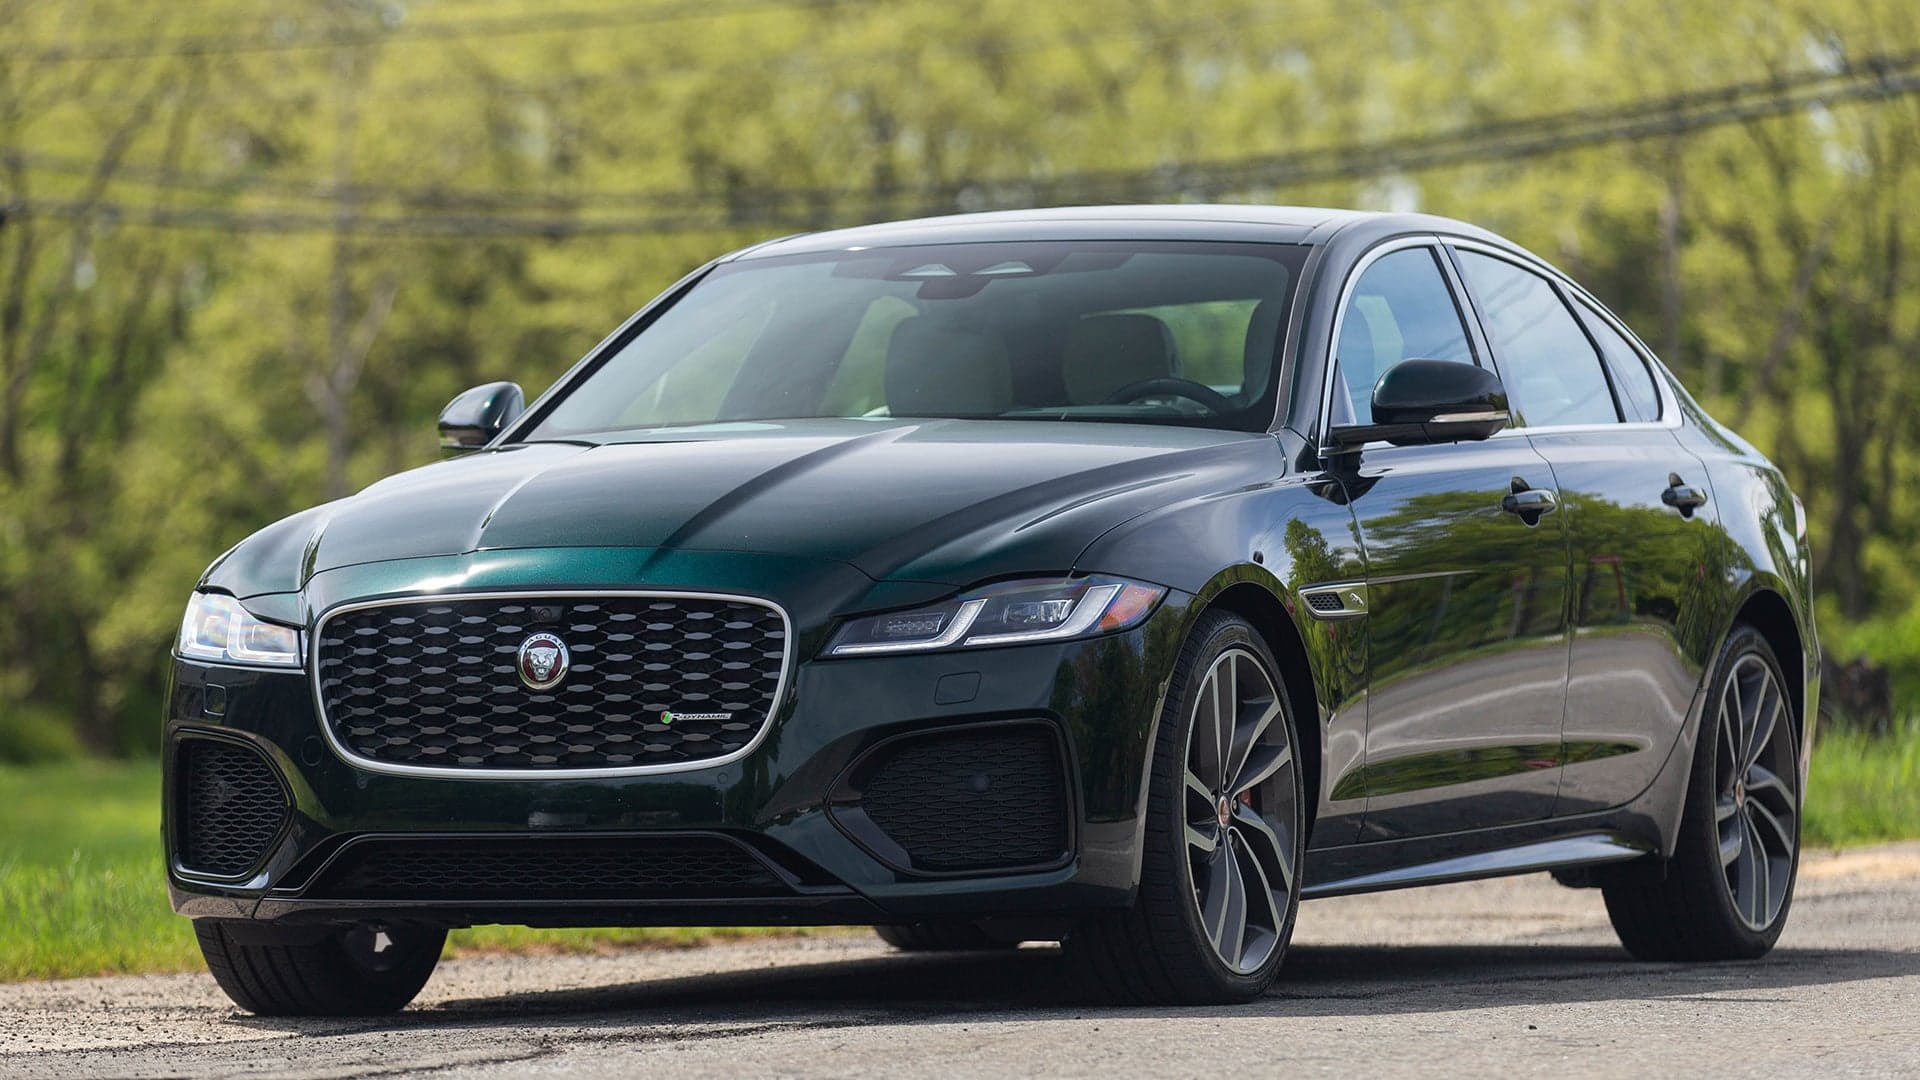 2021 Jaguar XF First Drive Review: Jaguar Didn’t Compromise on This One